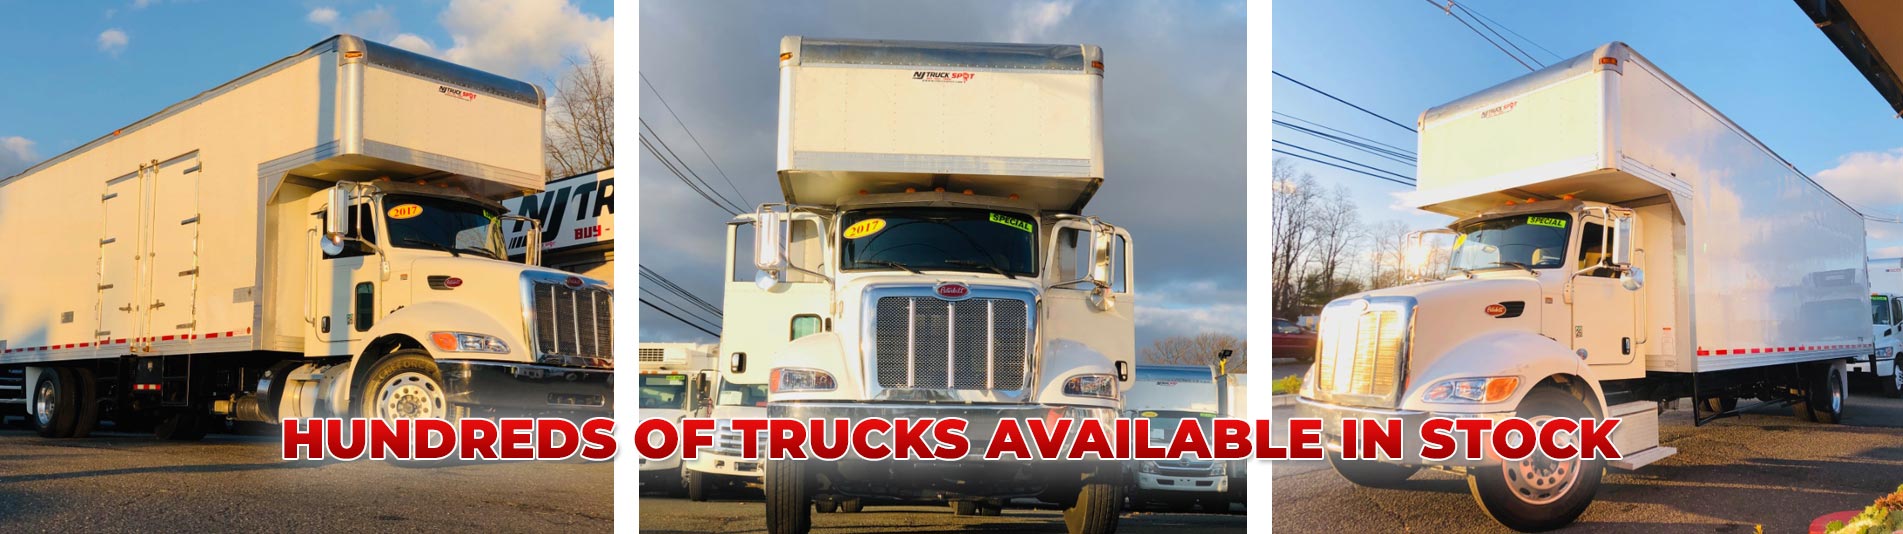 Used trucks for sale in South Amboy | NJ Truck Spot. South Amboy New Jersey.